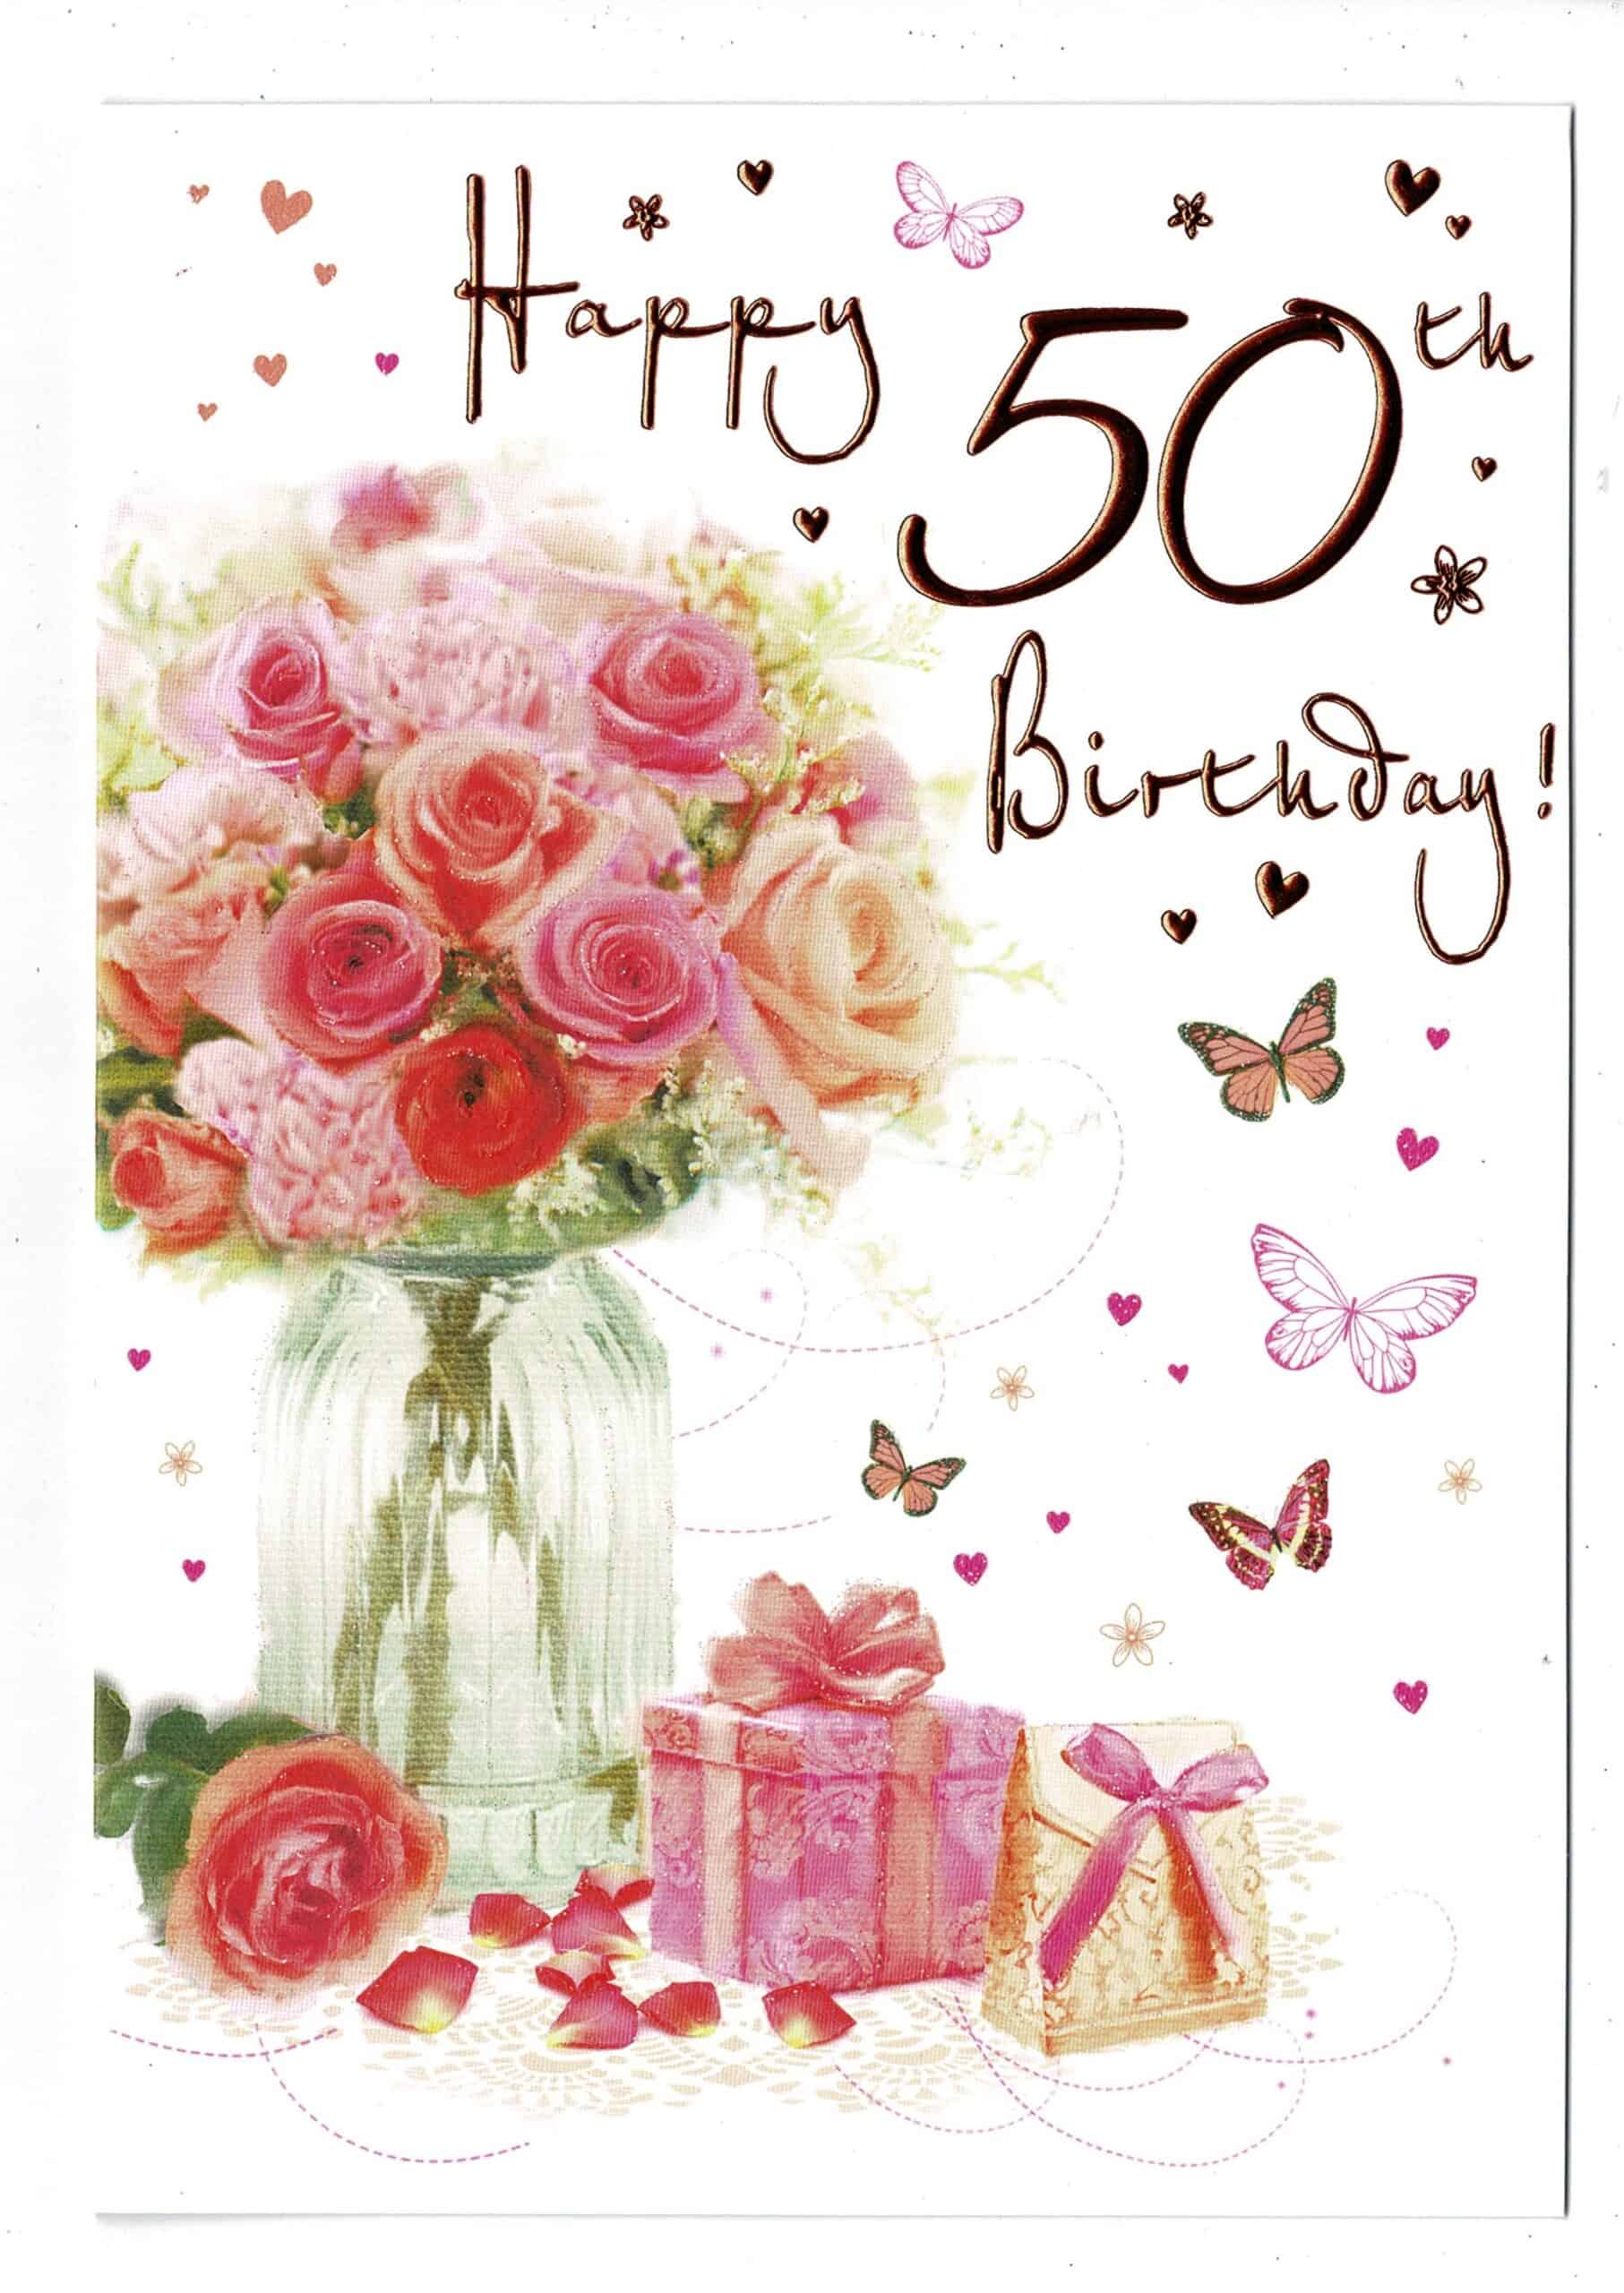 5Oth Birthday Card ' Happy 50th Birthday' With Floral Design - With ...